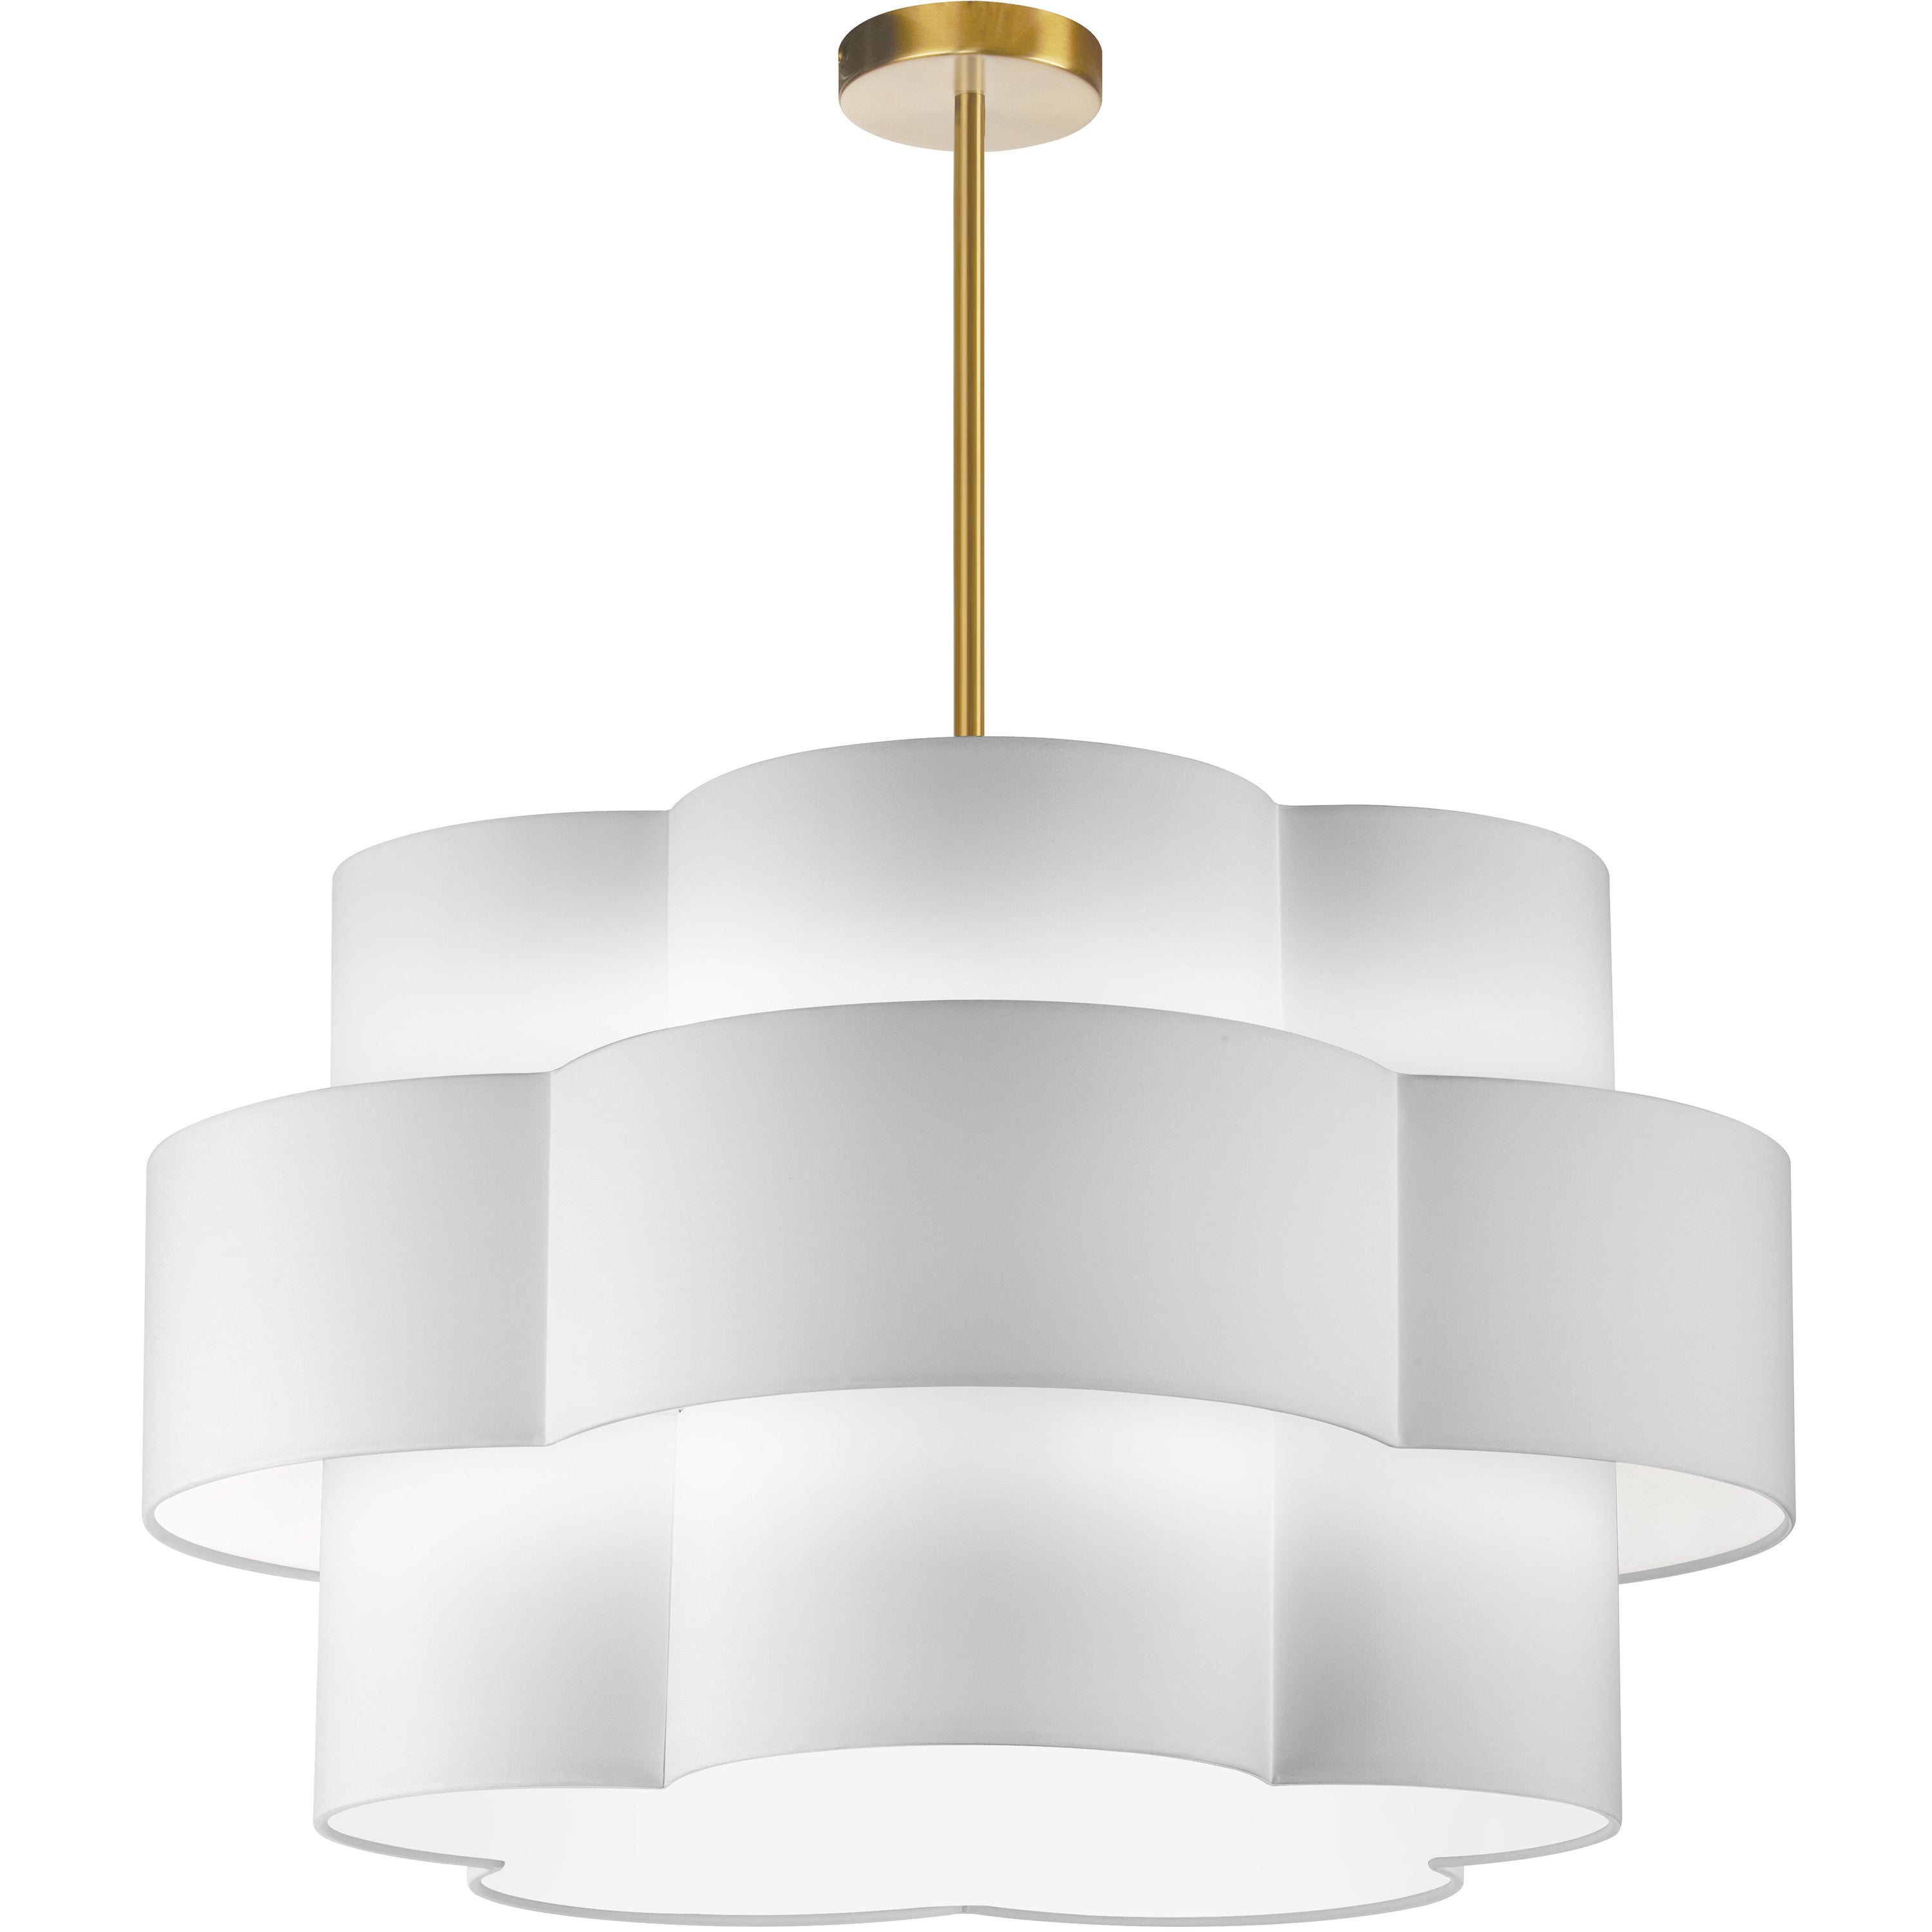 Dainolite Phlox - PLX-284C-AGB-WH - 4 Light Chandelier Fixture, Aged Brass with White Shade - White